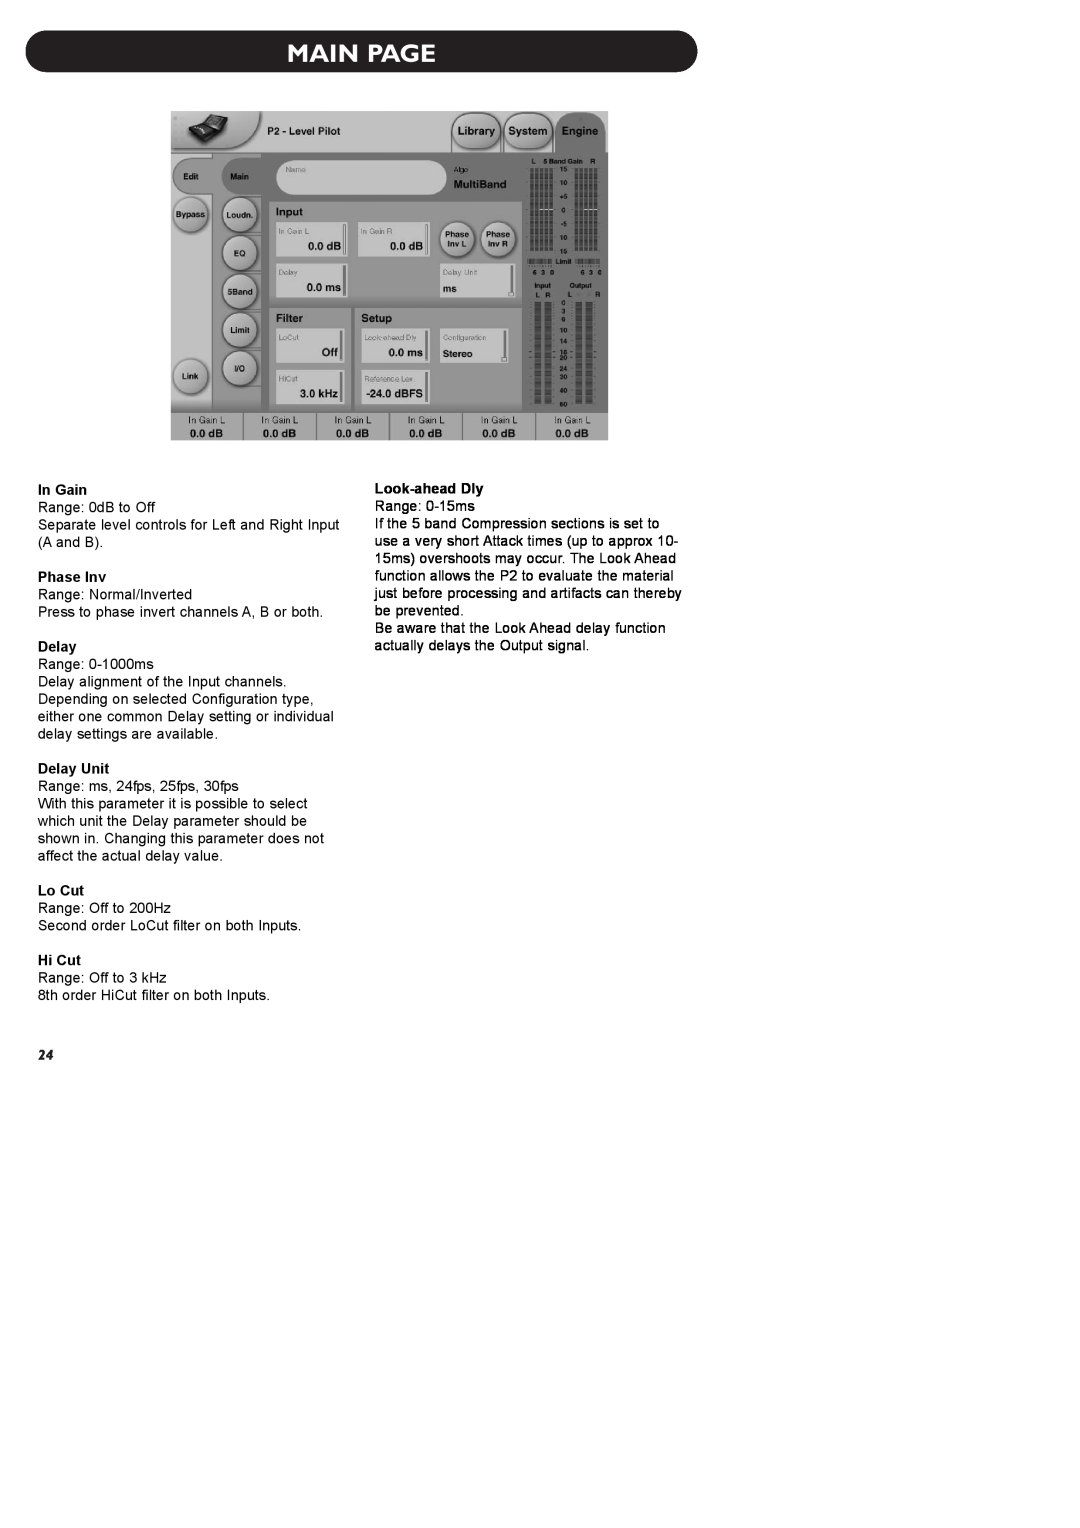 TC electronic SDN BHD P2 manual Main Page, In Gain, Phase Inv, Delay Unit, Lo Cut, Hi Cut, Look-aheadDly 